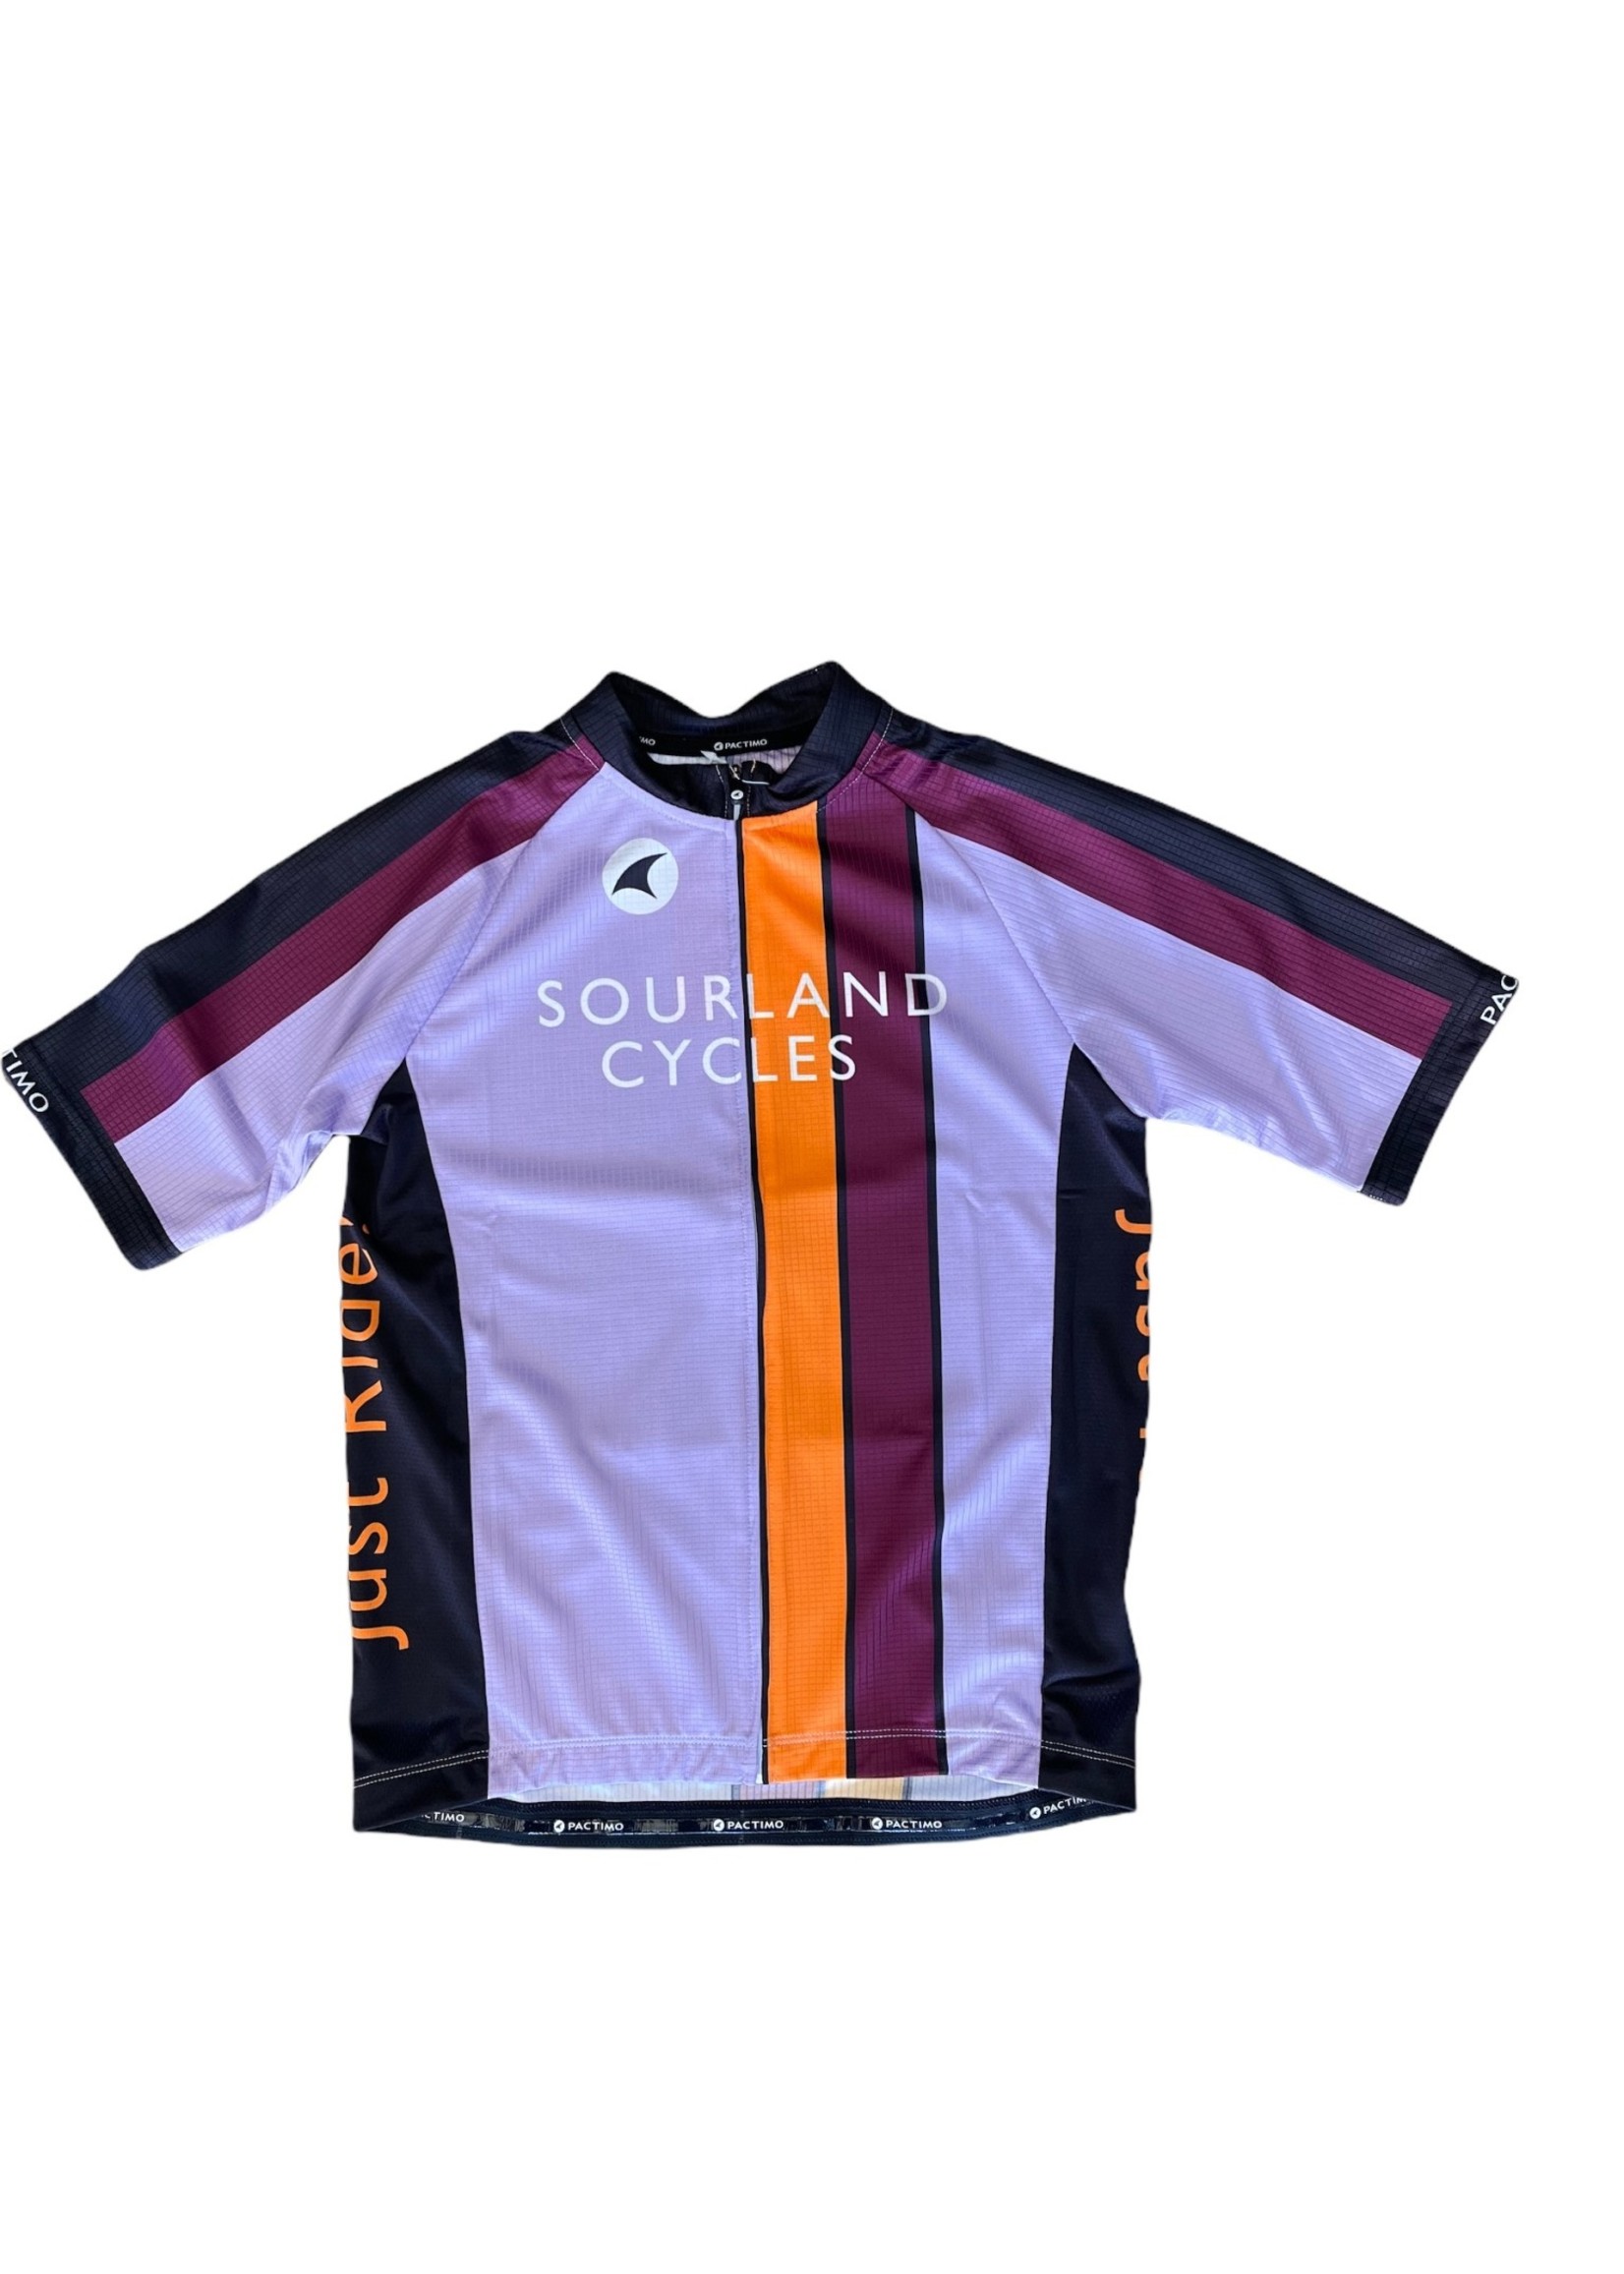 Pactimo Sourland Cycles Women's Pactimo Purple Jersey